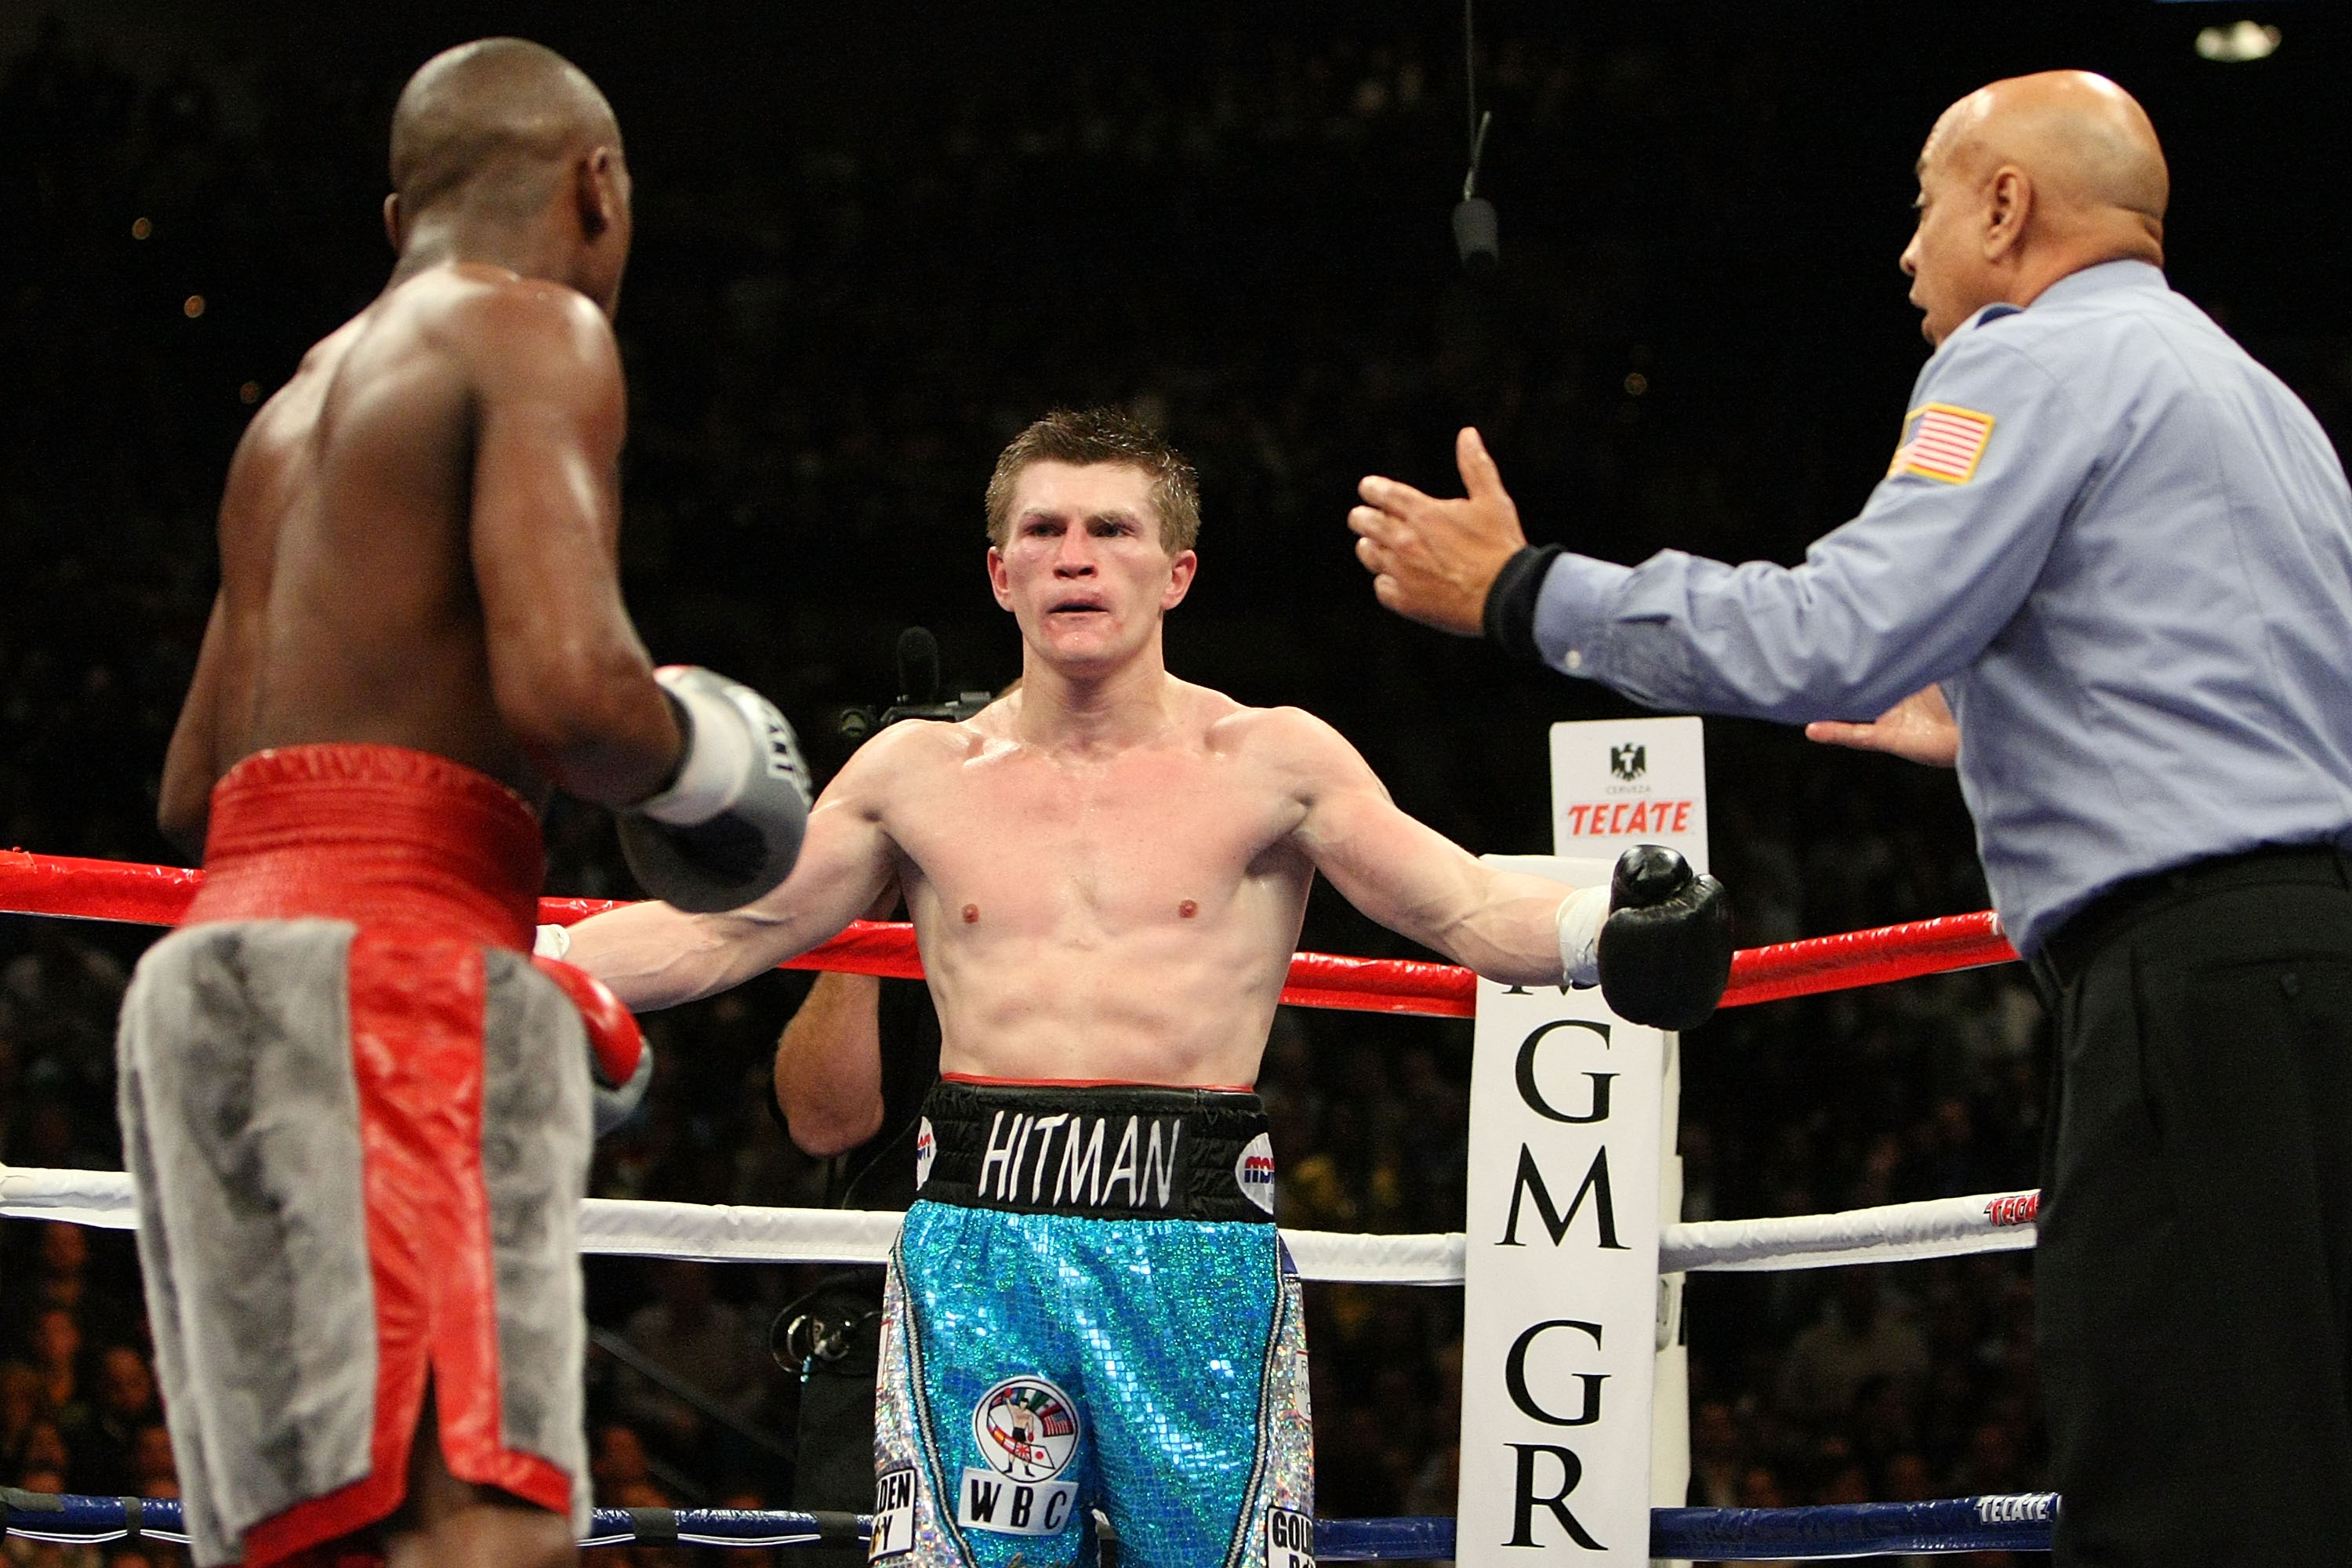 LAS VEGAS - DECEMBER 08:  (M) Ricky Hatton of England throws his arms out as he looks over at Floyd Mayweather Jr. and referee Joe Cortez during their WBC world welterweight championship fight at the MGM Grand Garden Arena on December 8, 2007 in Las Vegas